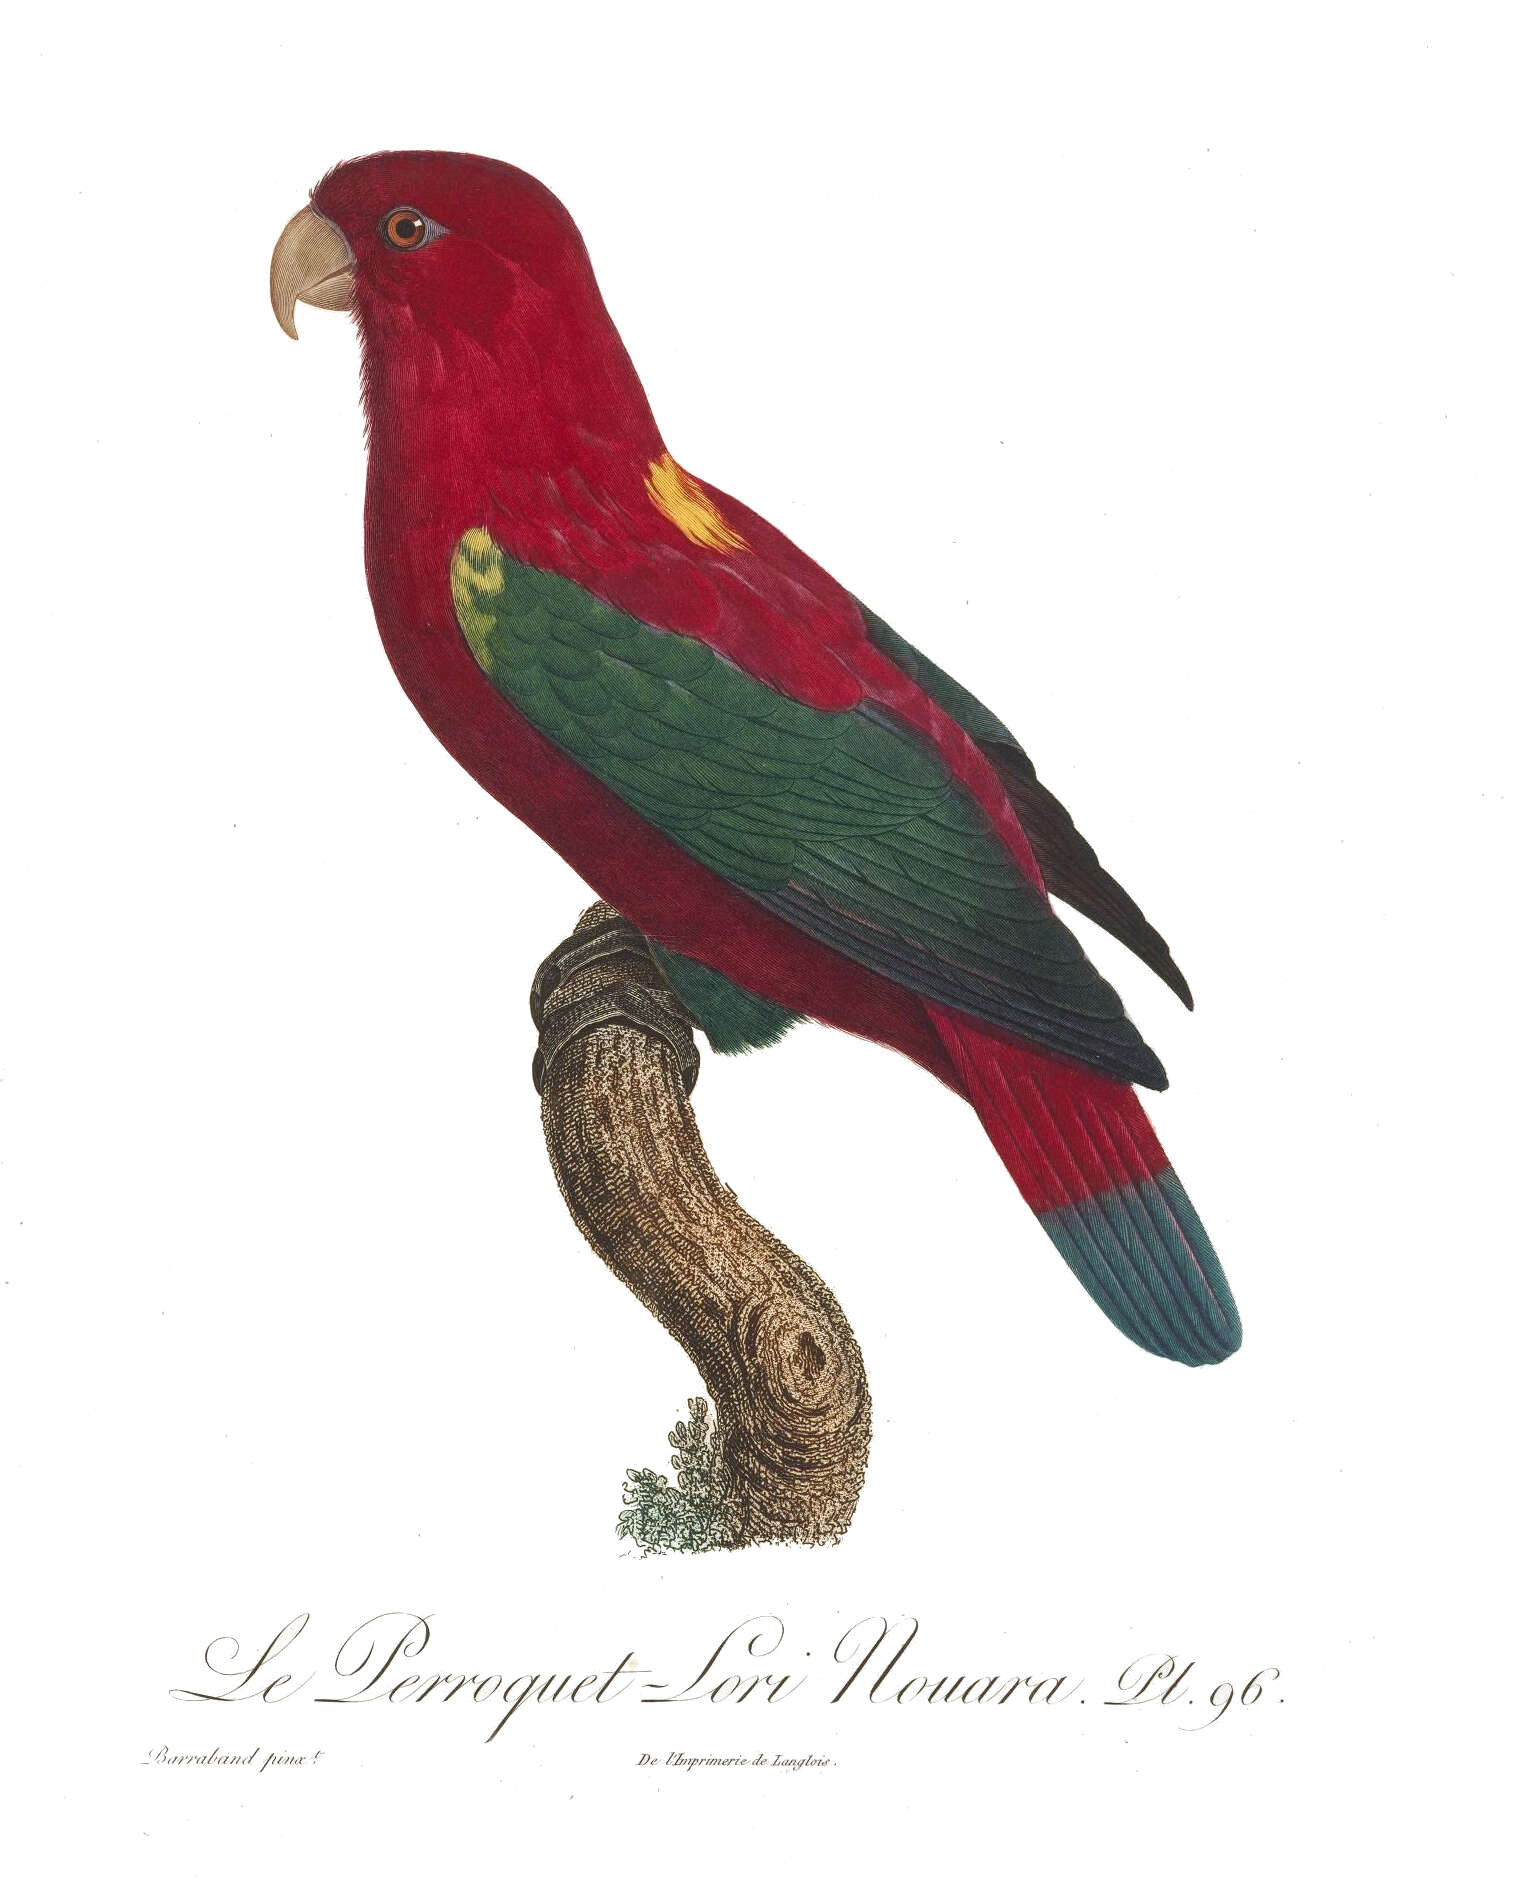 Image of Chattering Lory